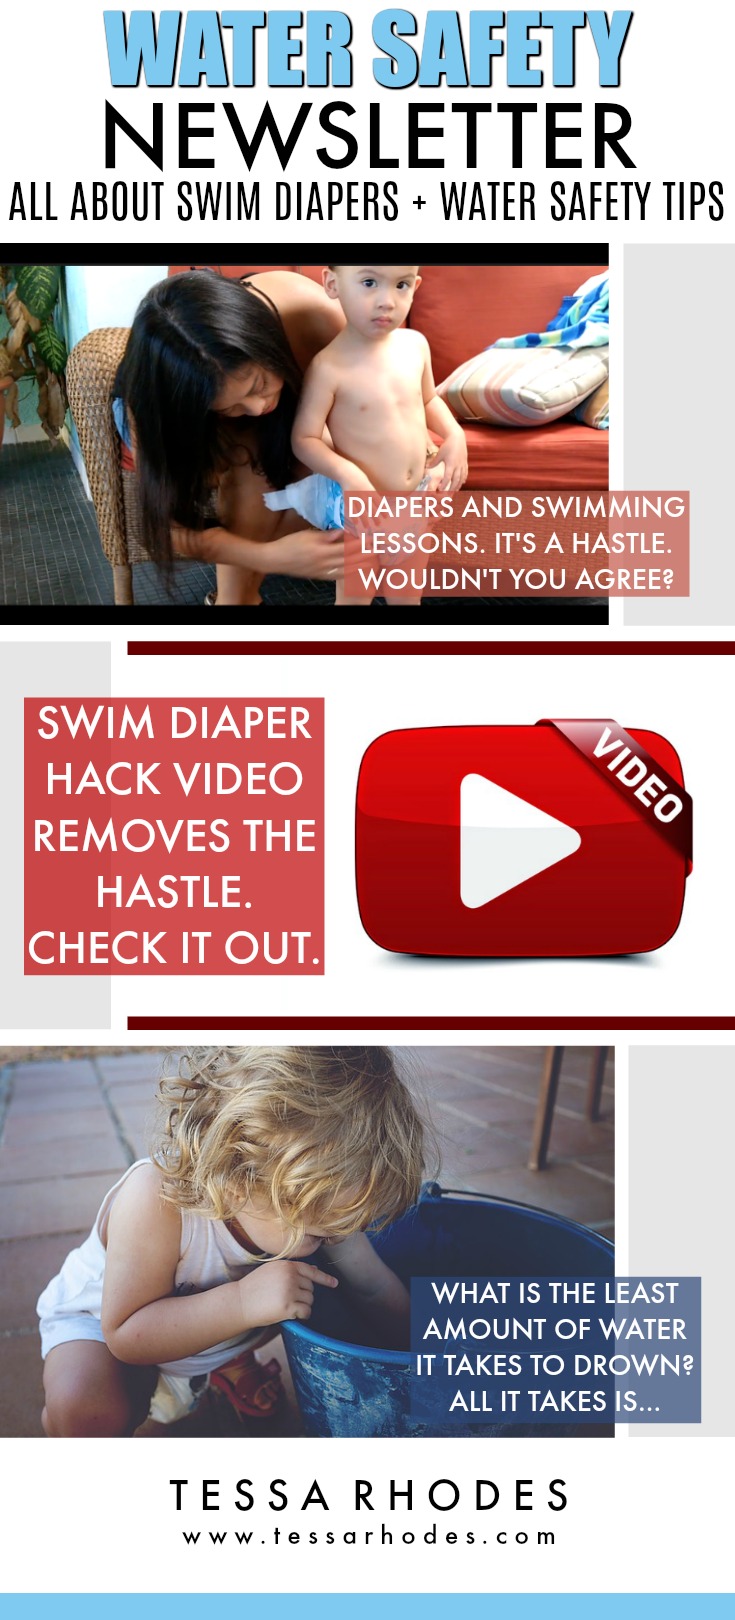 All about swim diapers. In case you thought that you wanted to know a whole lot about swim diapers, then you've come to the right place. Click through to read the full post. It includes a swim diaper hack video. You'll want to check this out. It's a great time saver. Other points covered. Best swim diaper practices, disposable swim diapers vs. reusable swim diapers, why don't swim diapers hold urine and the answer to what is the least amount of water it takes to drown? Plus water safety tips.